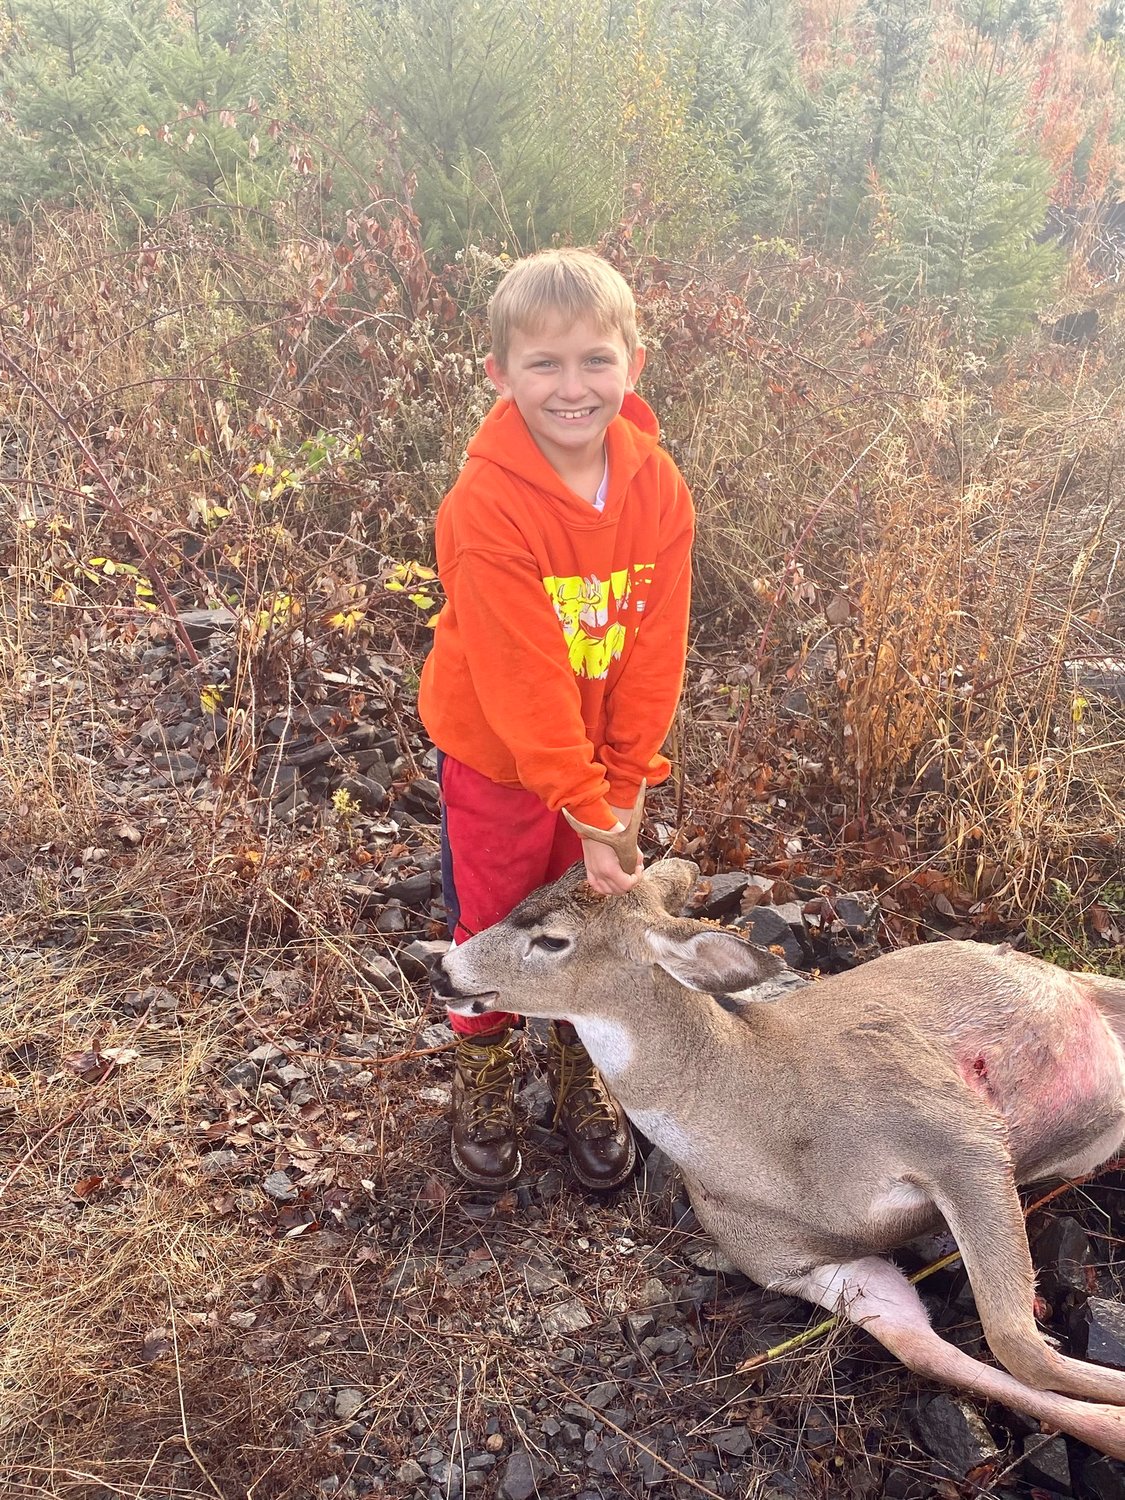 "Our son Easton Rivera, age 9. First year hunting and filled his tag, harvested from the St. Helens Tree Farm." — Submitted by Mikayla Ellis